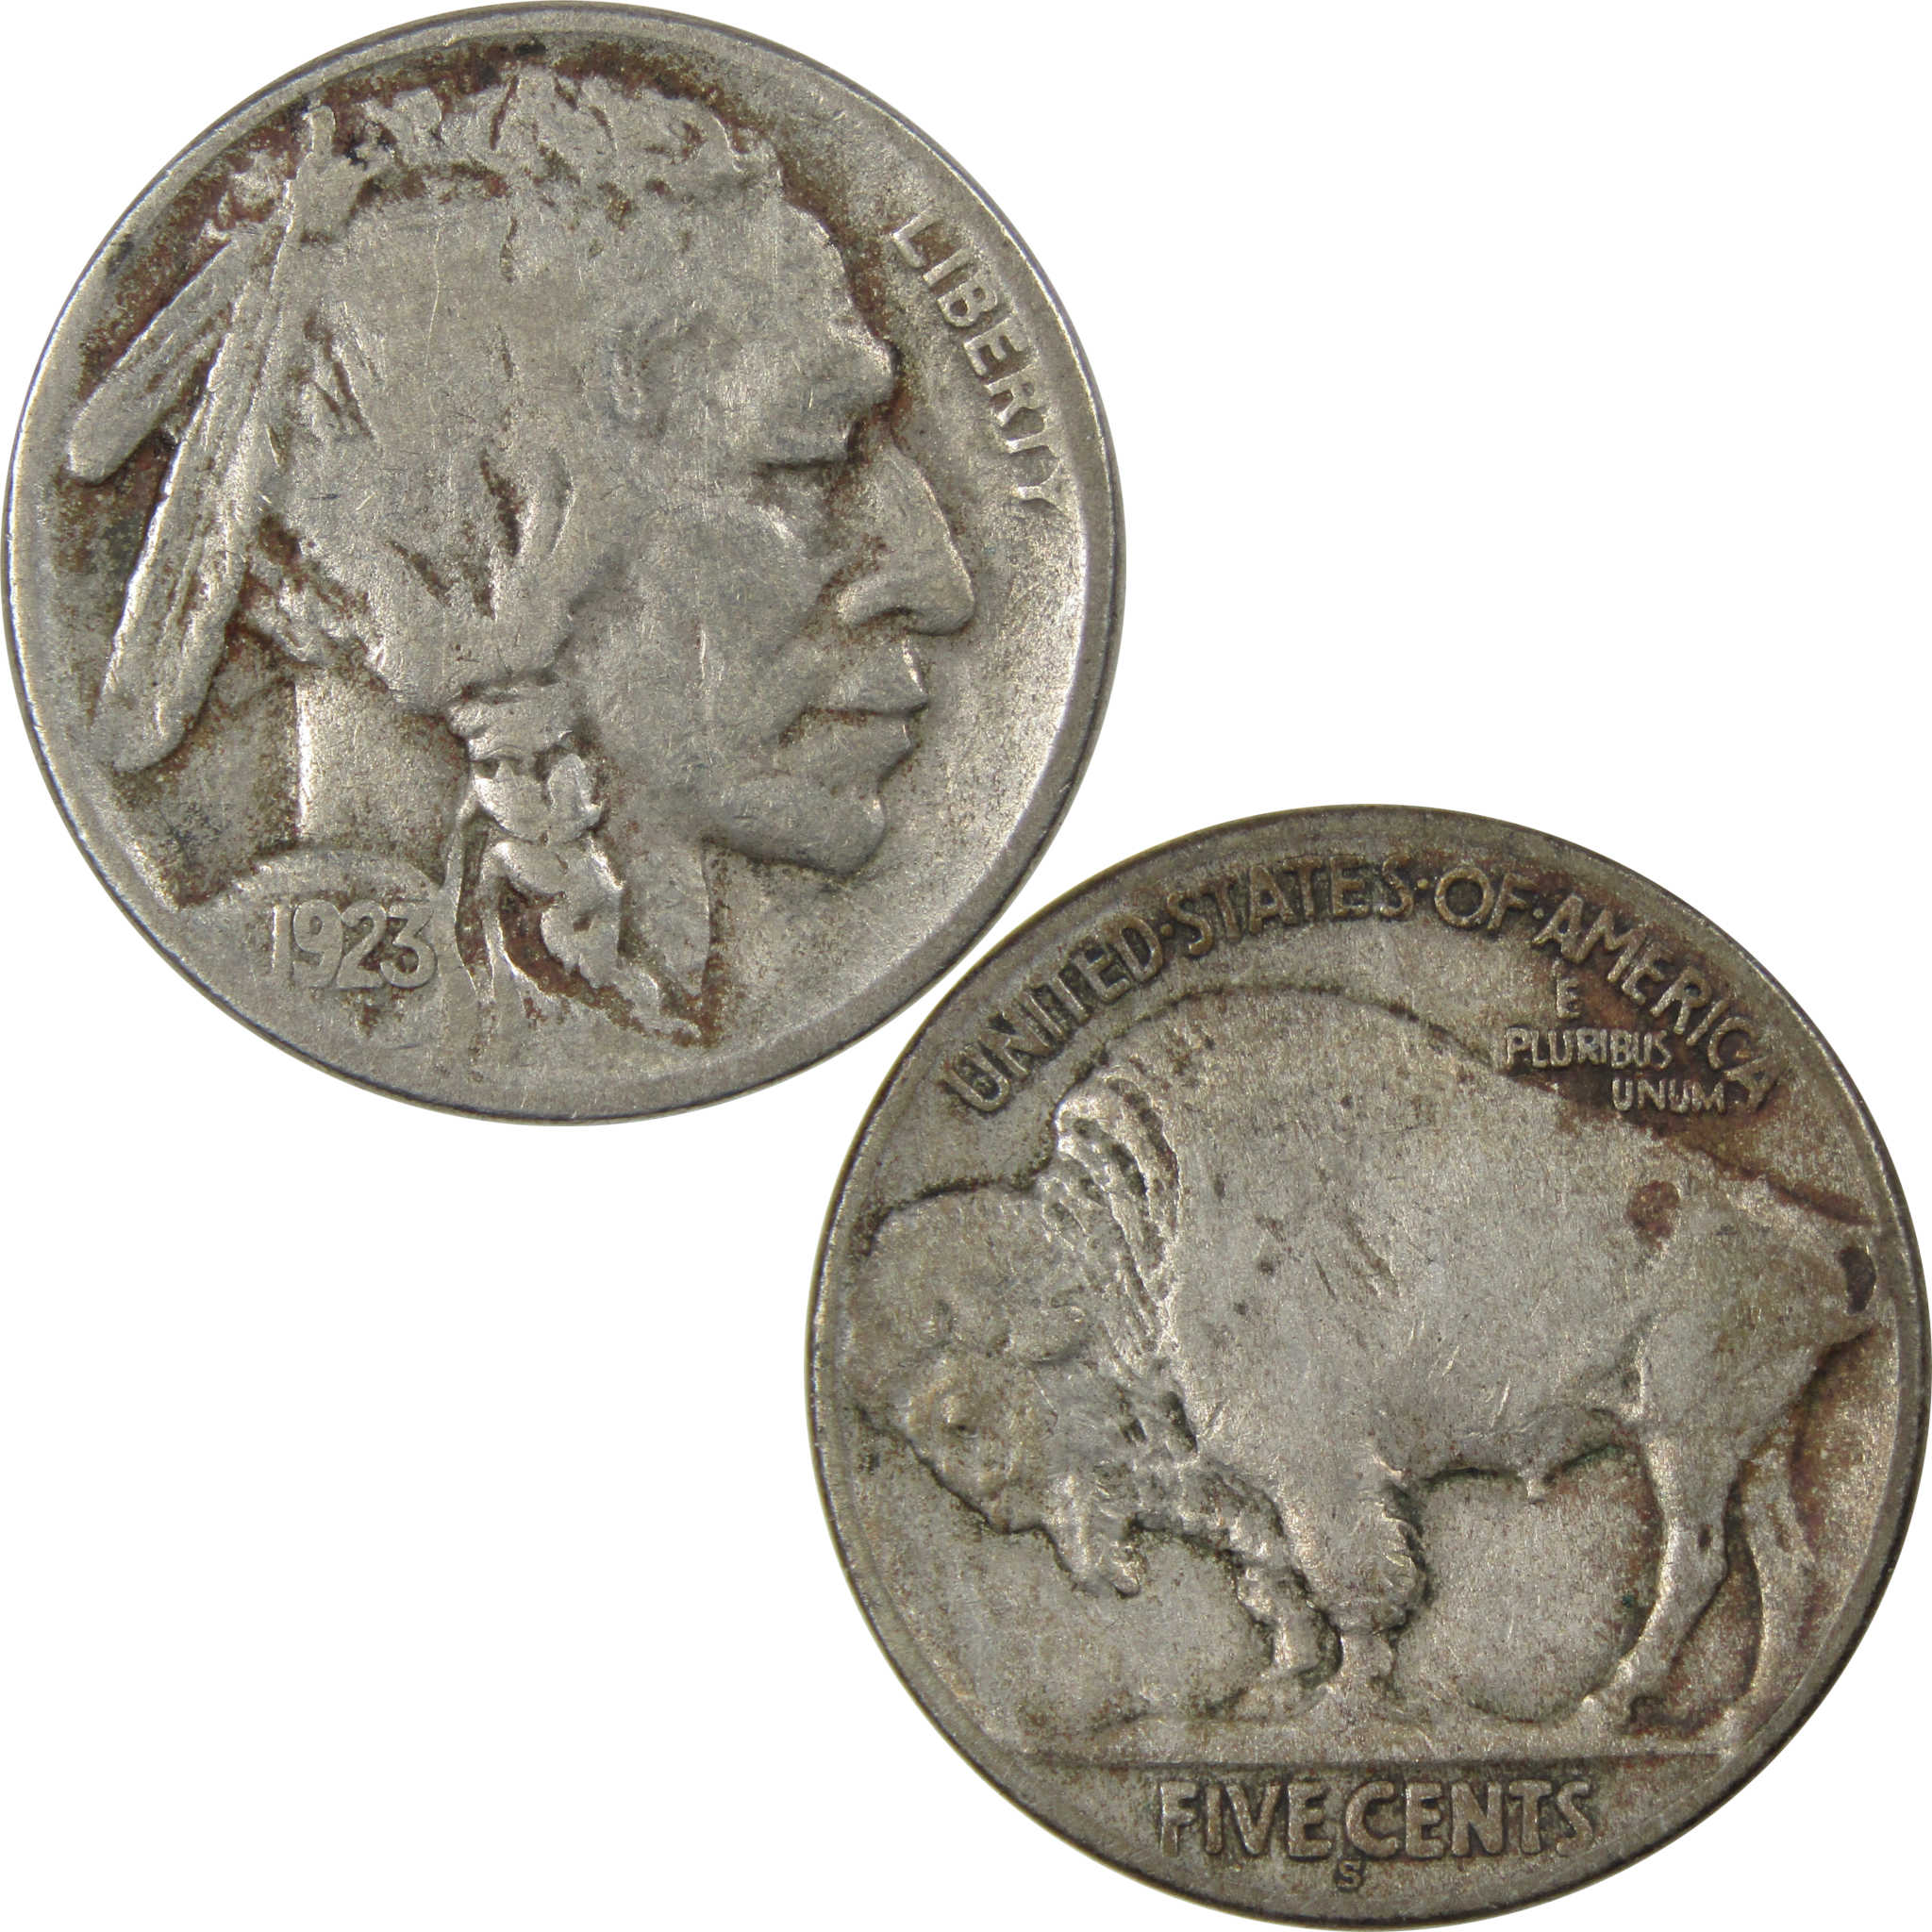 Are Buffalo Nickels Worth Anything? Rarity and Price Can Vary